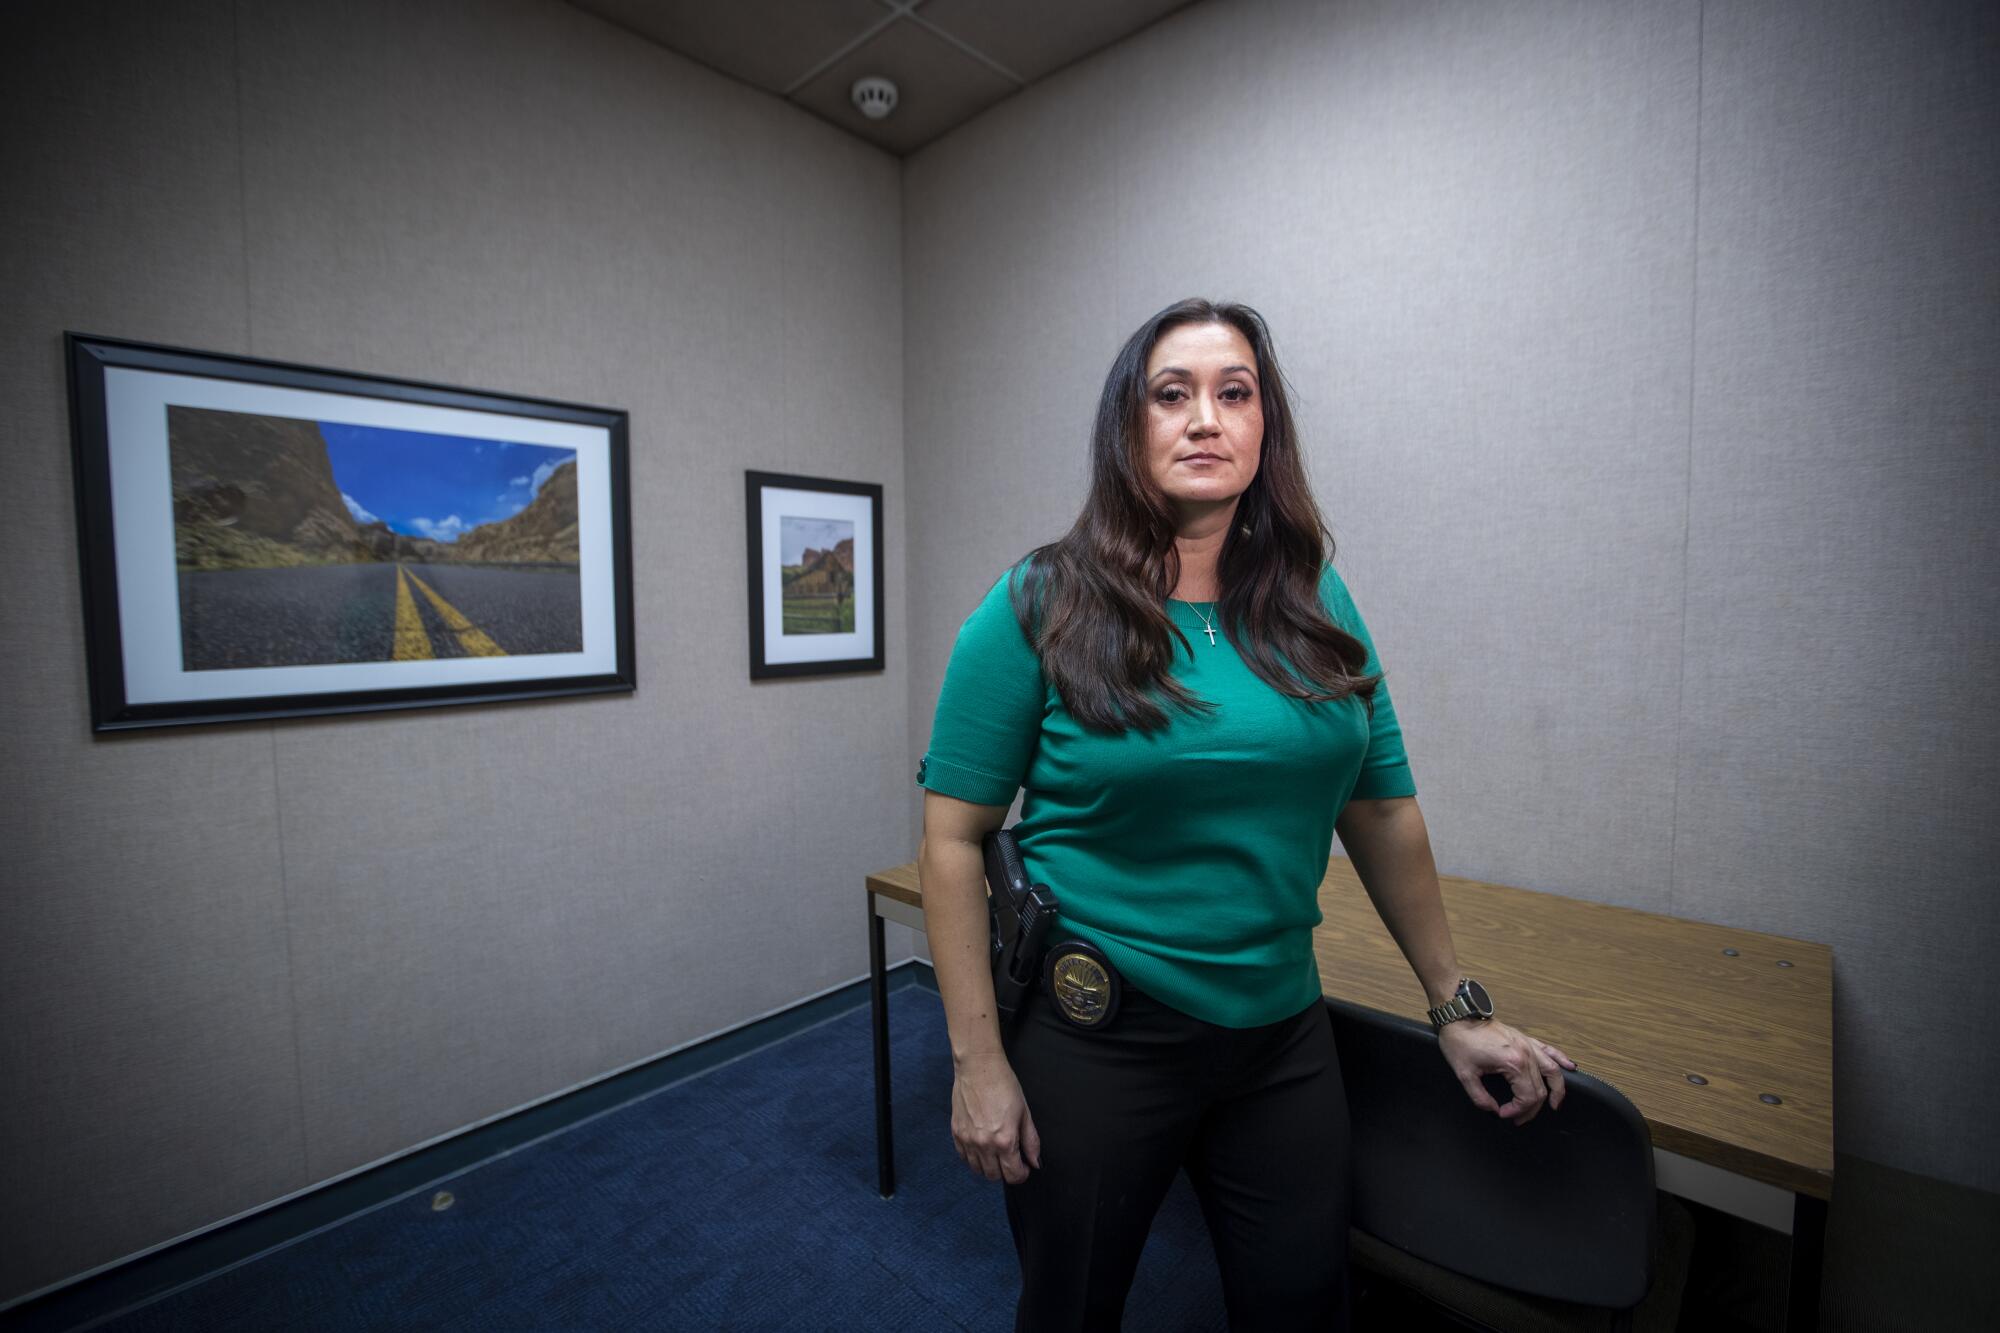  Detective Julissa Trapp stands in the interrogation room